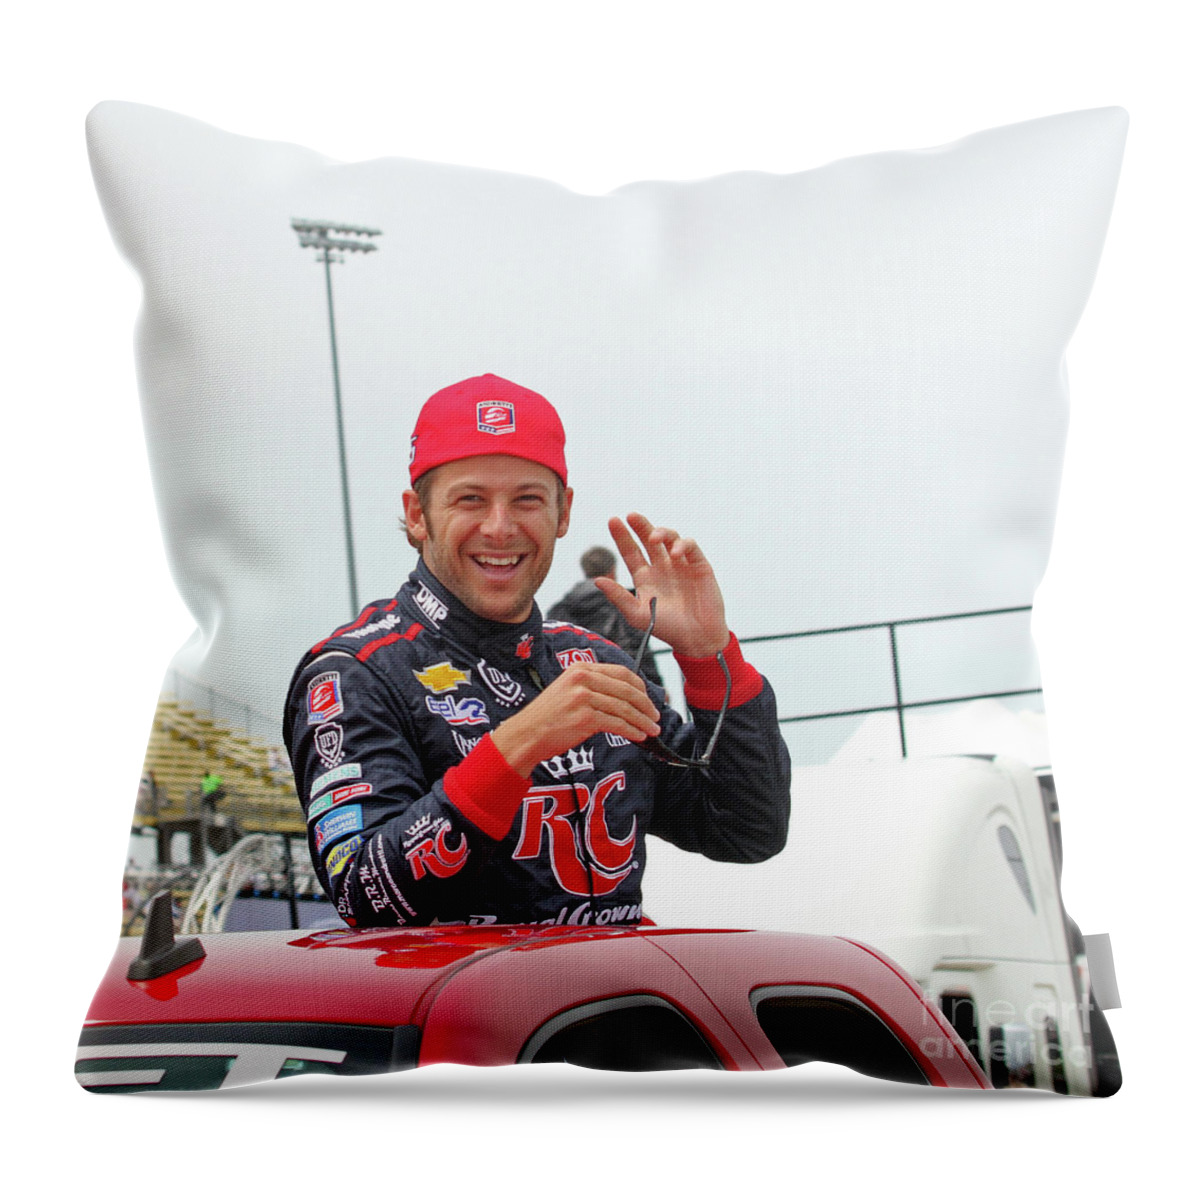 Indycar Throw Pillow featuring the photograph Marco Andretti - Iowa Corn 250 Iowa Speedway 2013 Marco Andretti by Pete Klinger